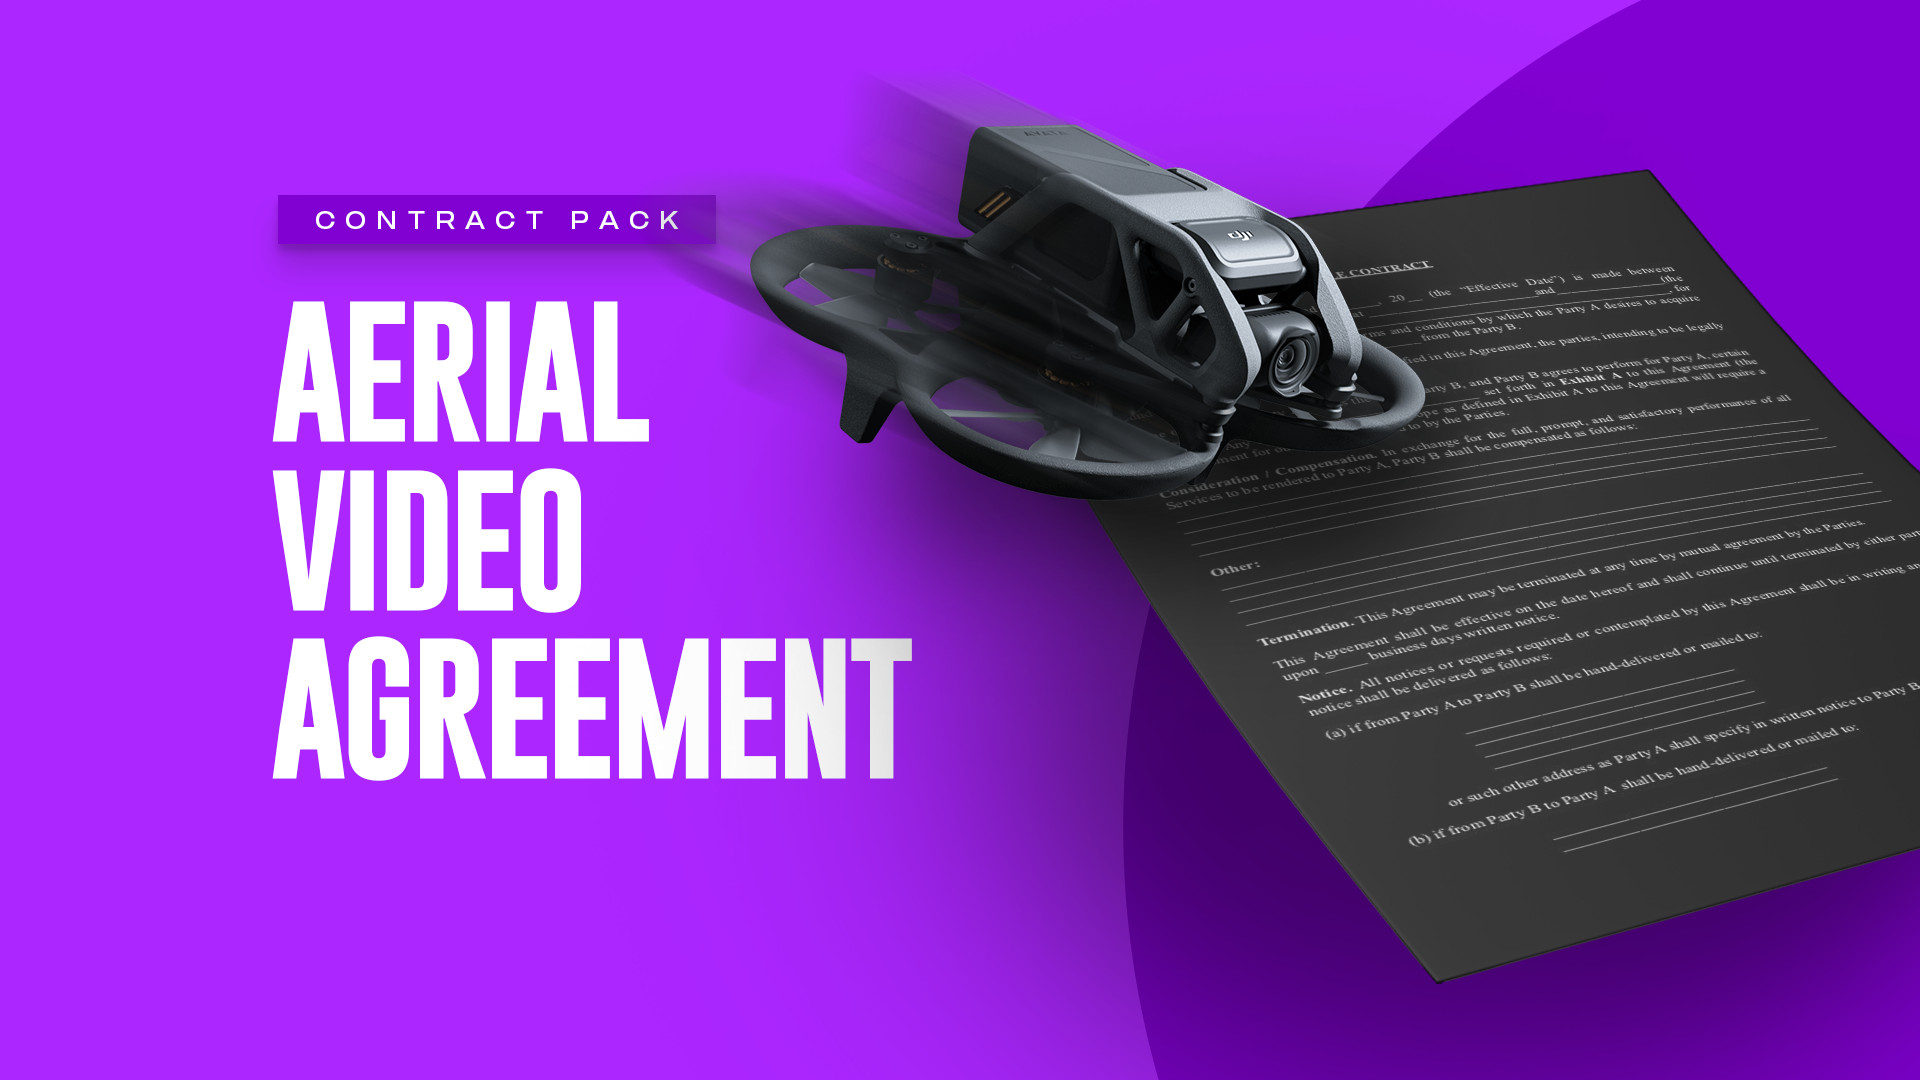 Aerial Video Agreement.png